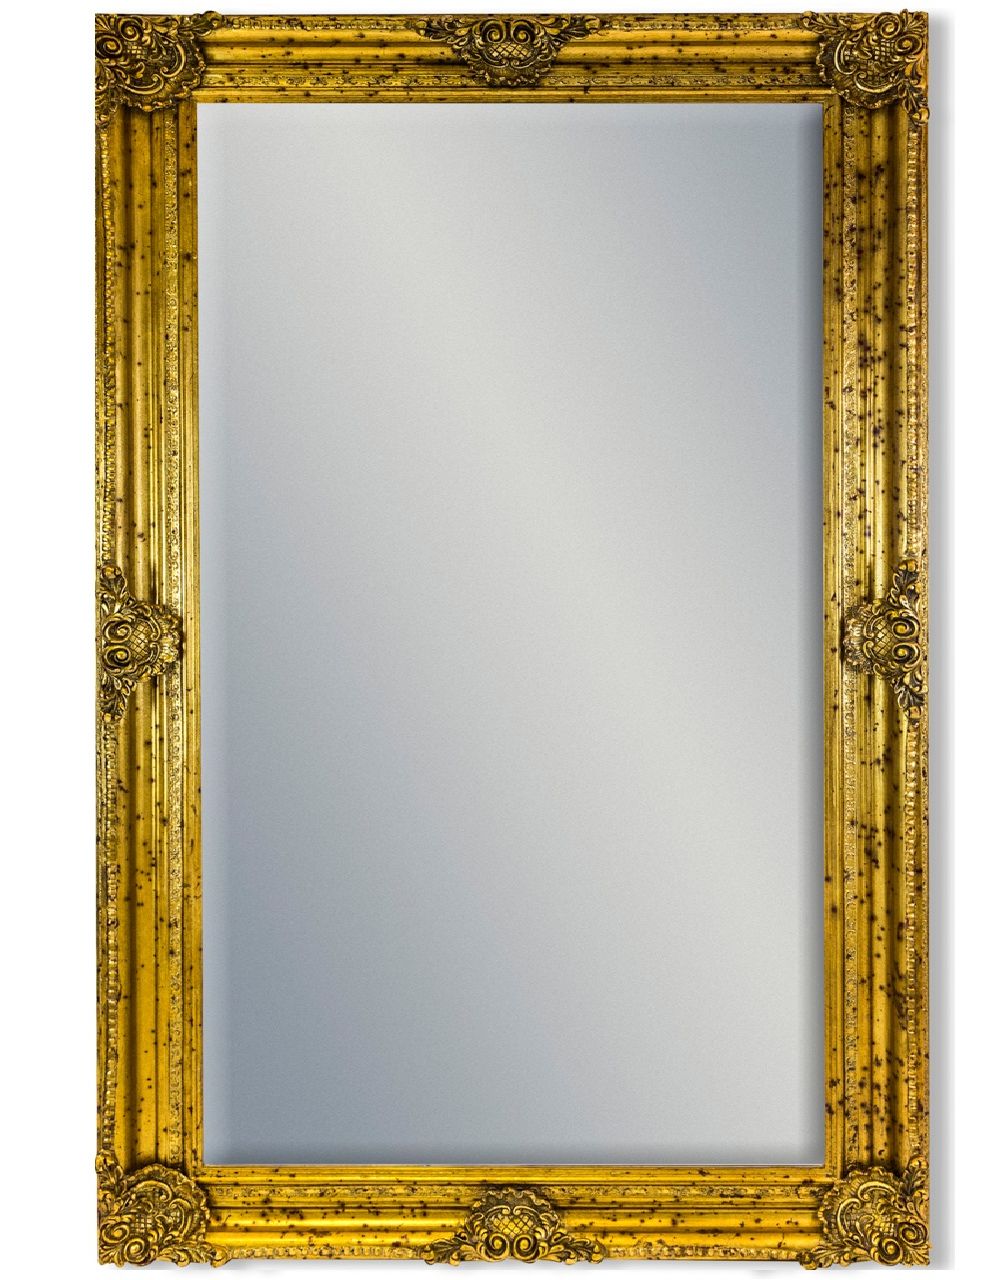 Warm Gold Rectangular Wall Mirrors With Favorite Extra Large Gold Rectangular Classic Mirror (View 12 of 15)